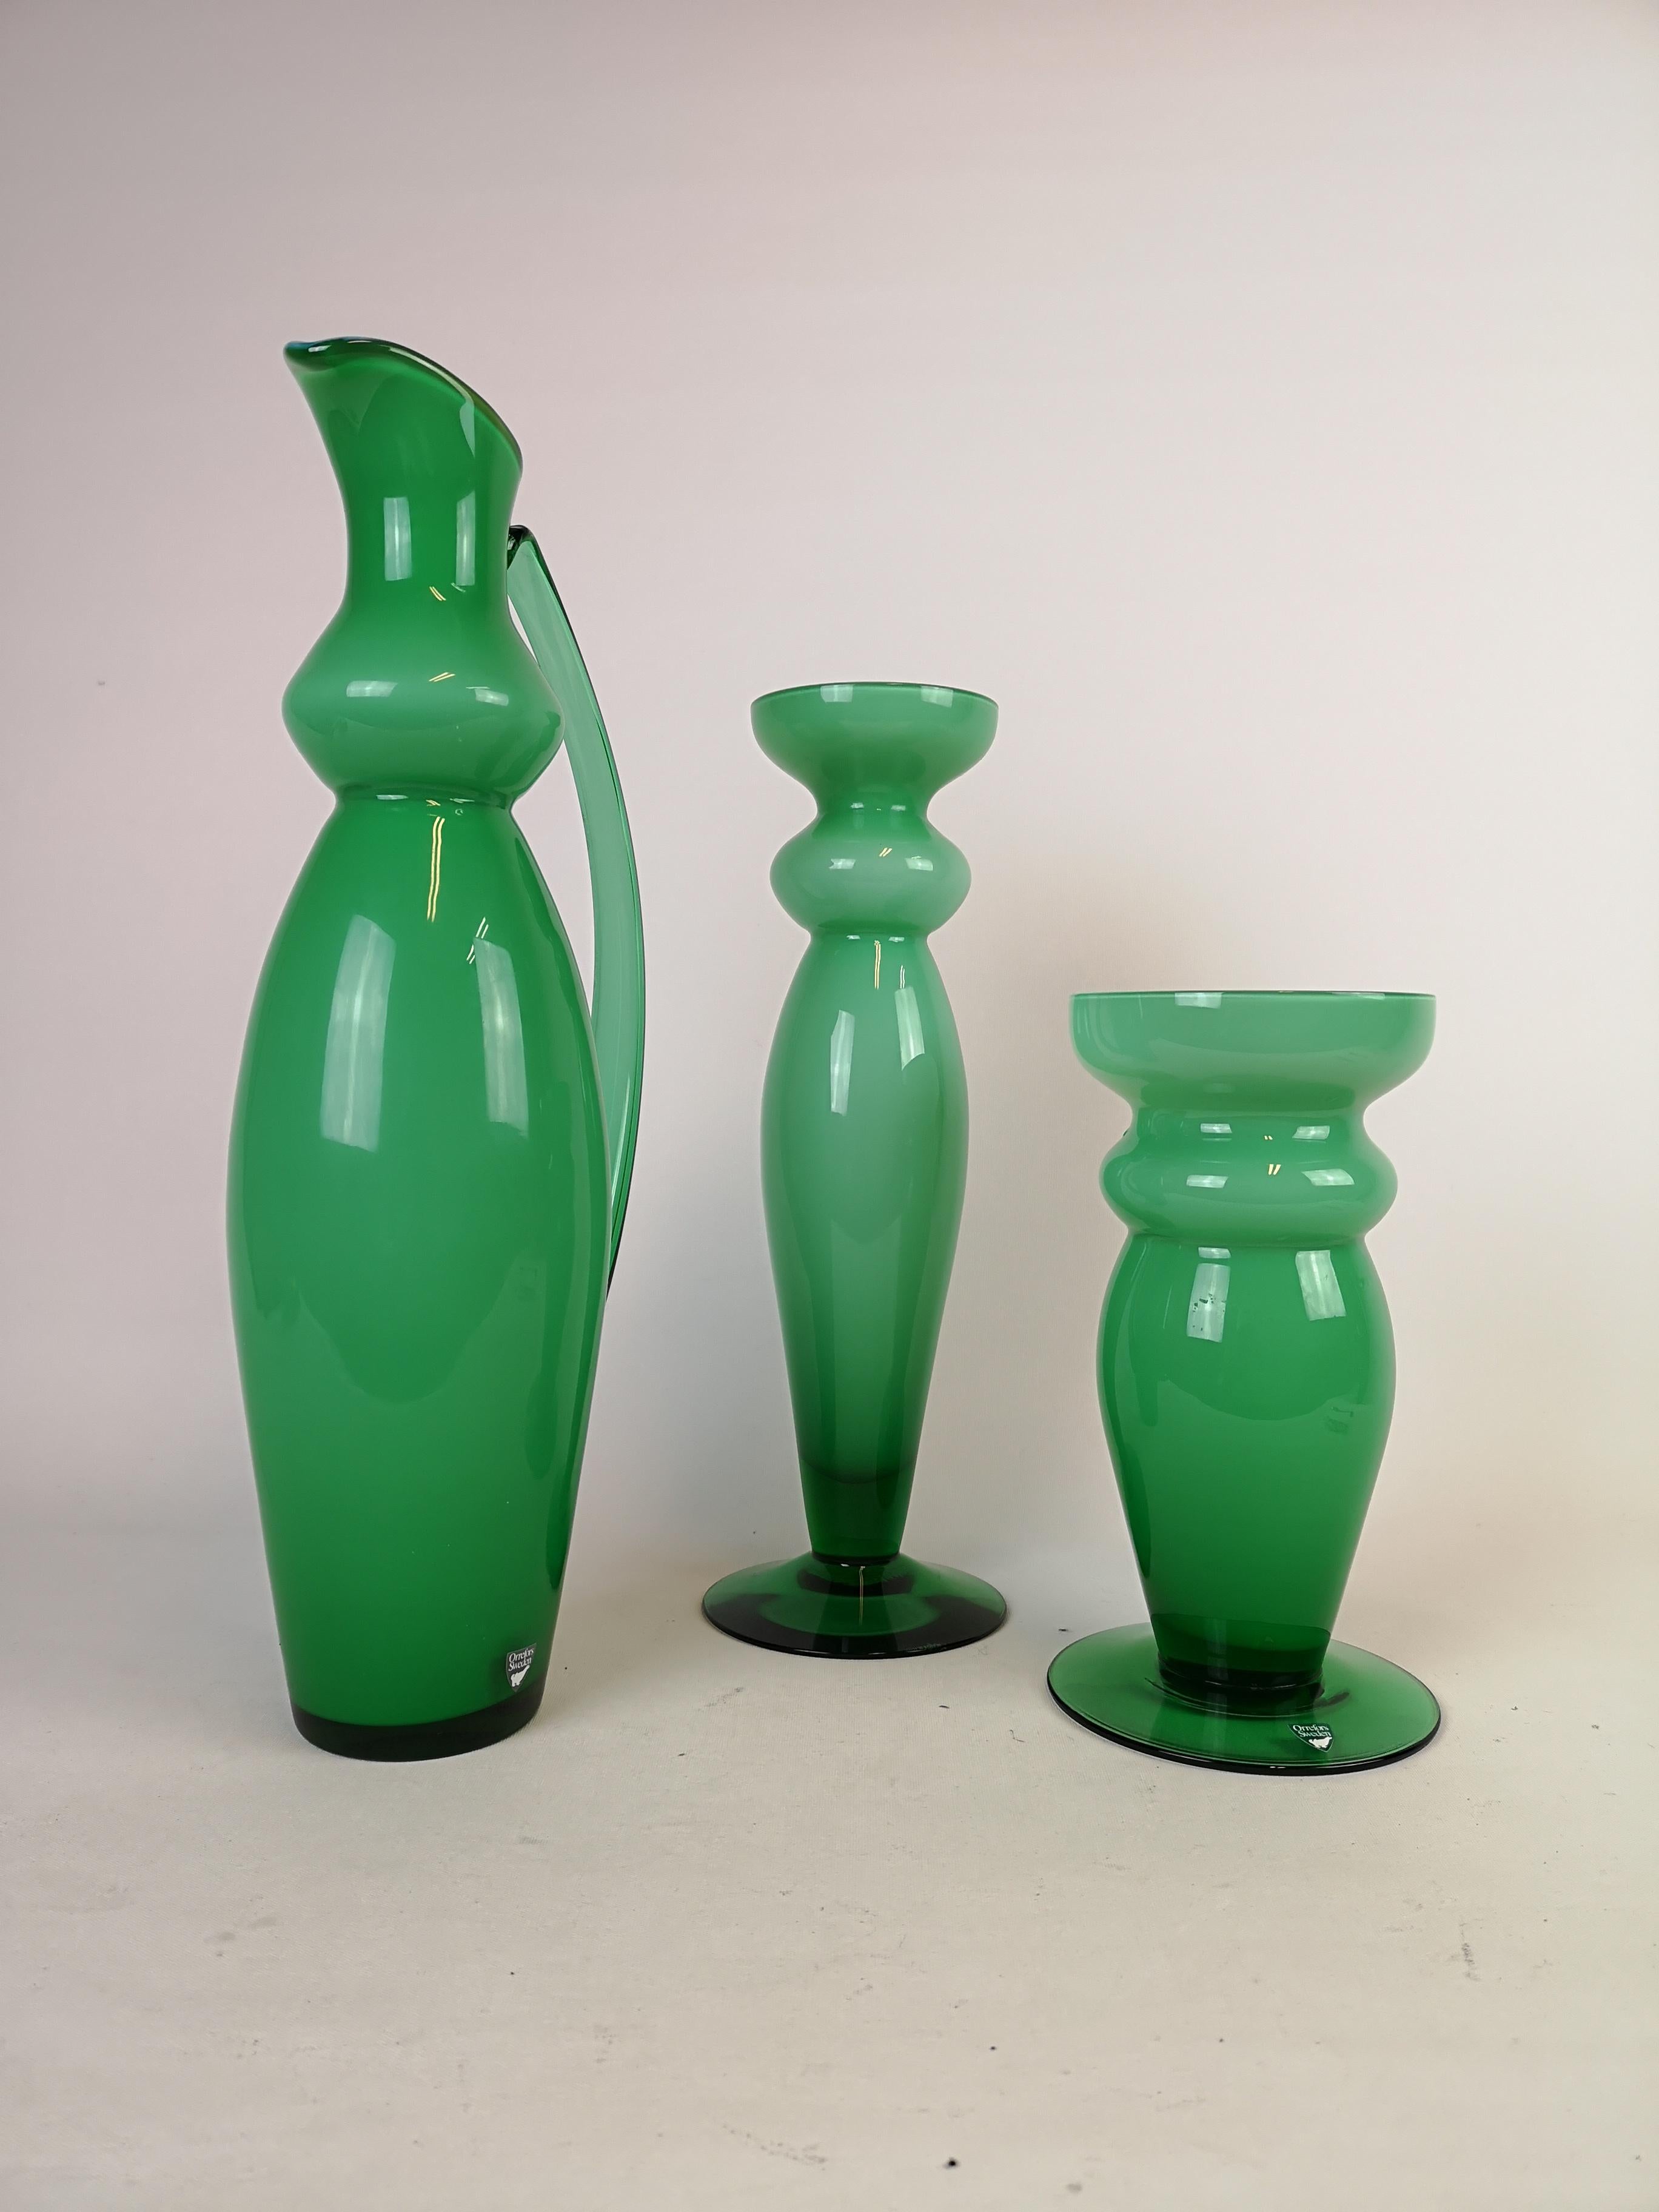 These 3 pieces are made at Orrefors two vases and one large jug.

Very good condition

Measures: Jug H 39 cm, large vase H 33 cm, small vase H 22 cm.
  